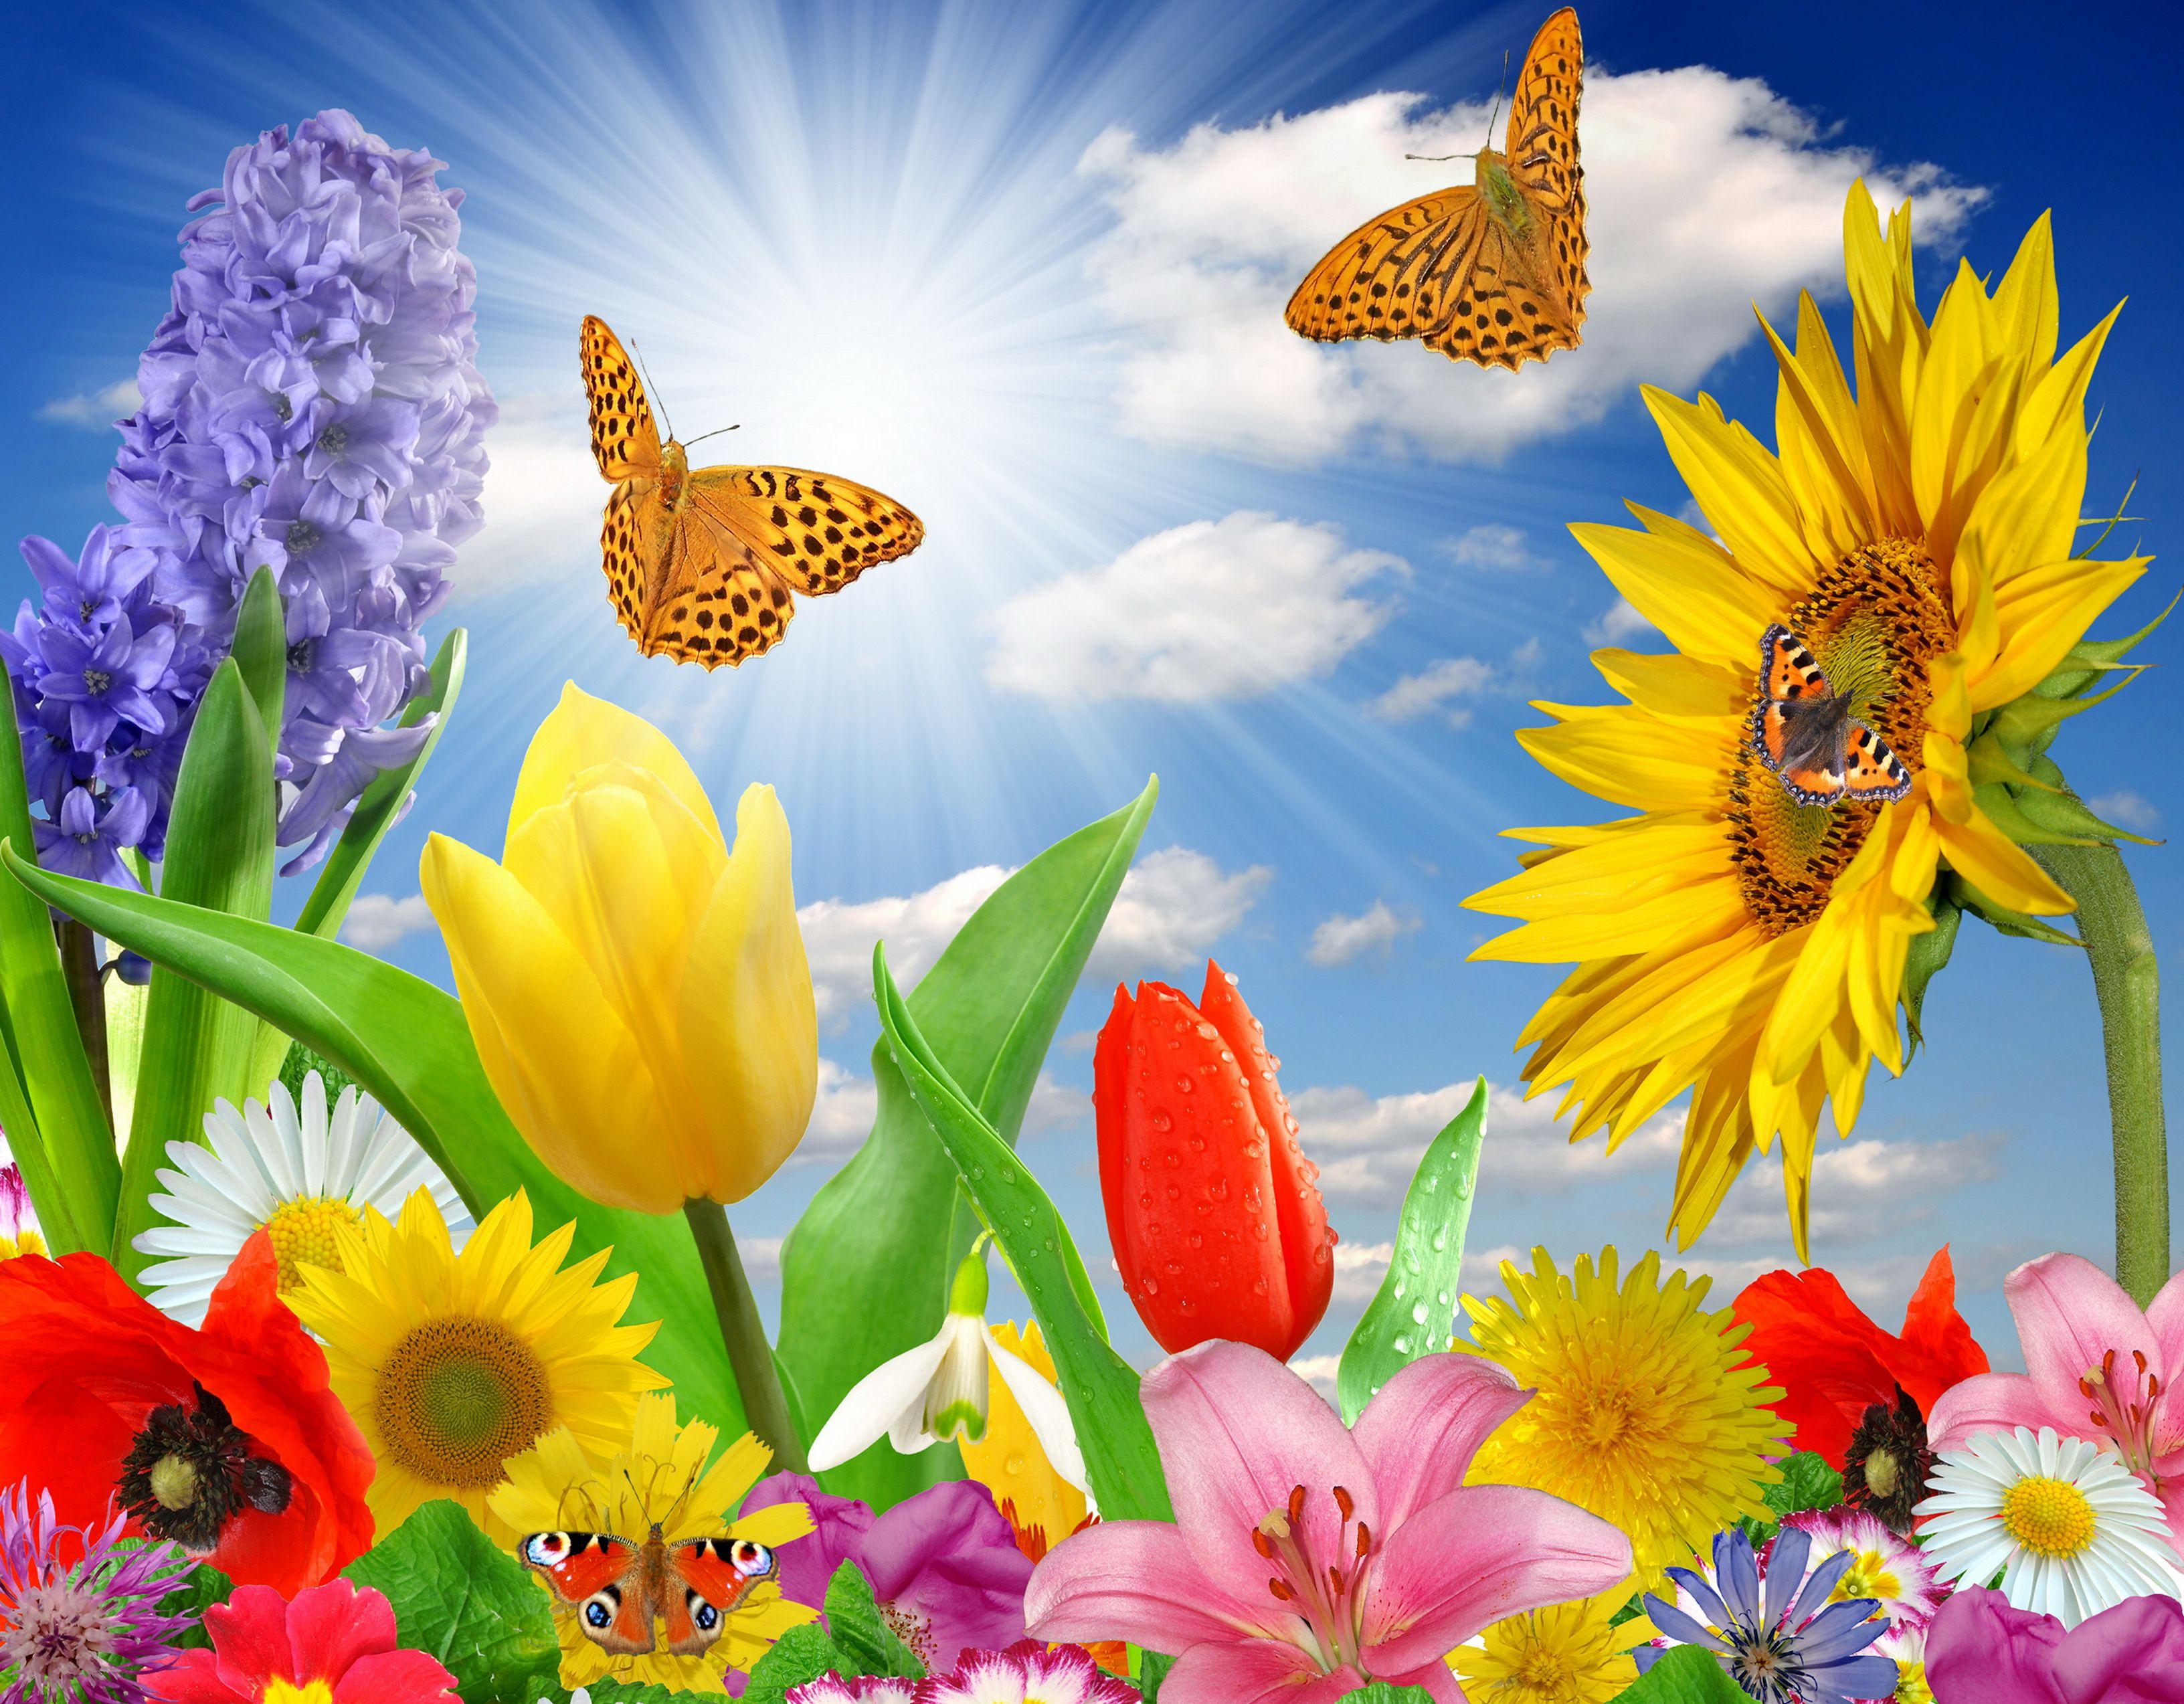 Spring Flowers and Butterflies Wallpaper Free Spring Flowers and Butterflies Background